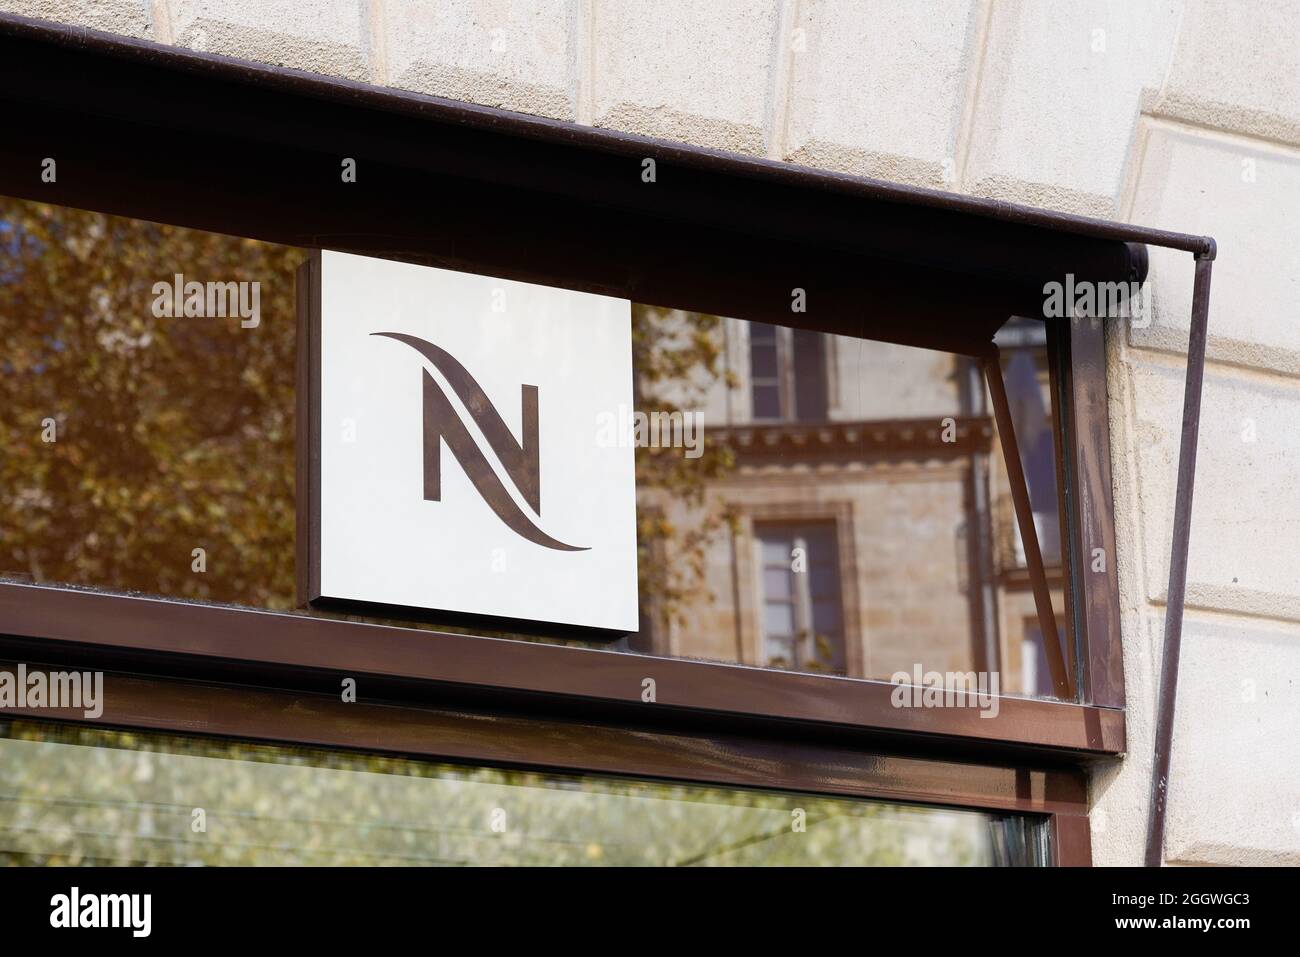 Bordeaux , Aquitaine  France - 12 25 2020 : Nespresso logo sign brand of coffee machines front of shop on store capsules and accessories Stock Photo